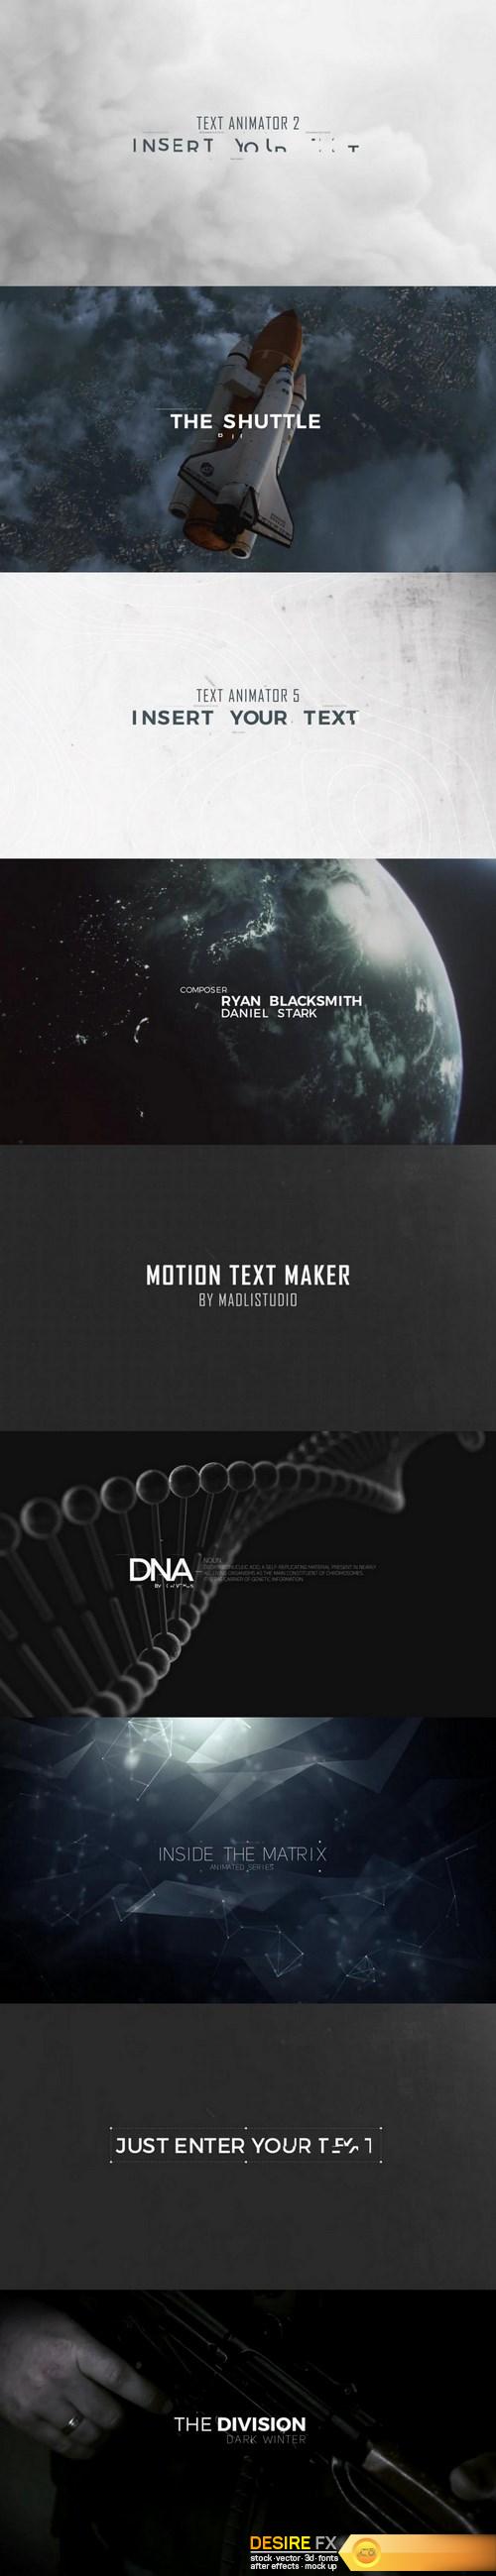 videohive-18119422-motion-text-maker